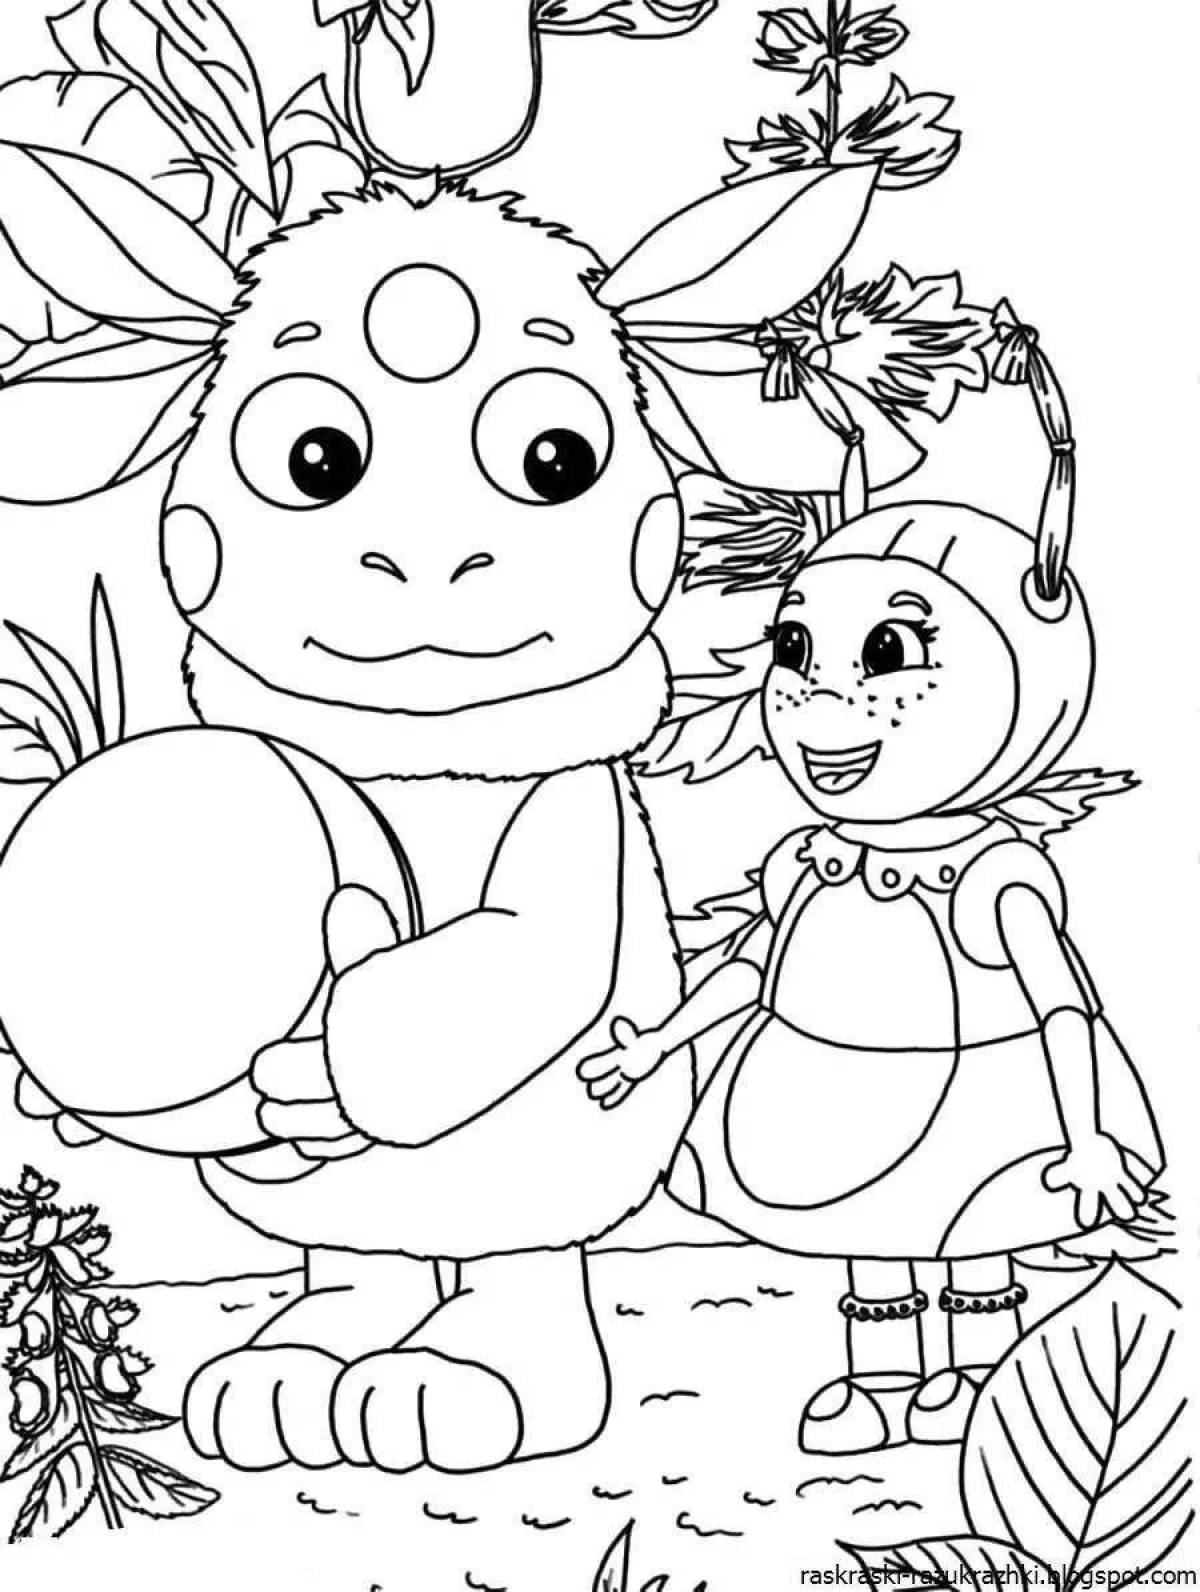 Amazing cartoon coloring book for 6-7 year olds